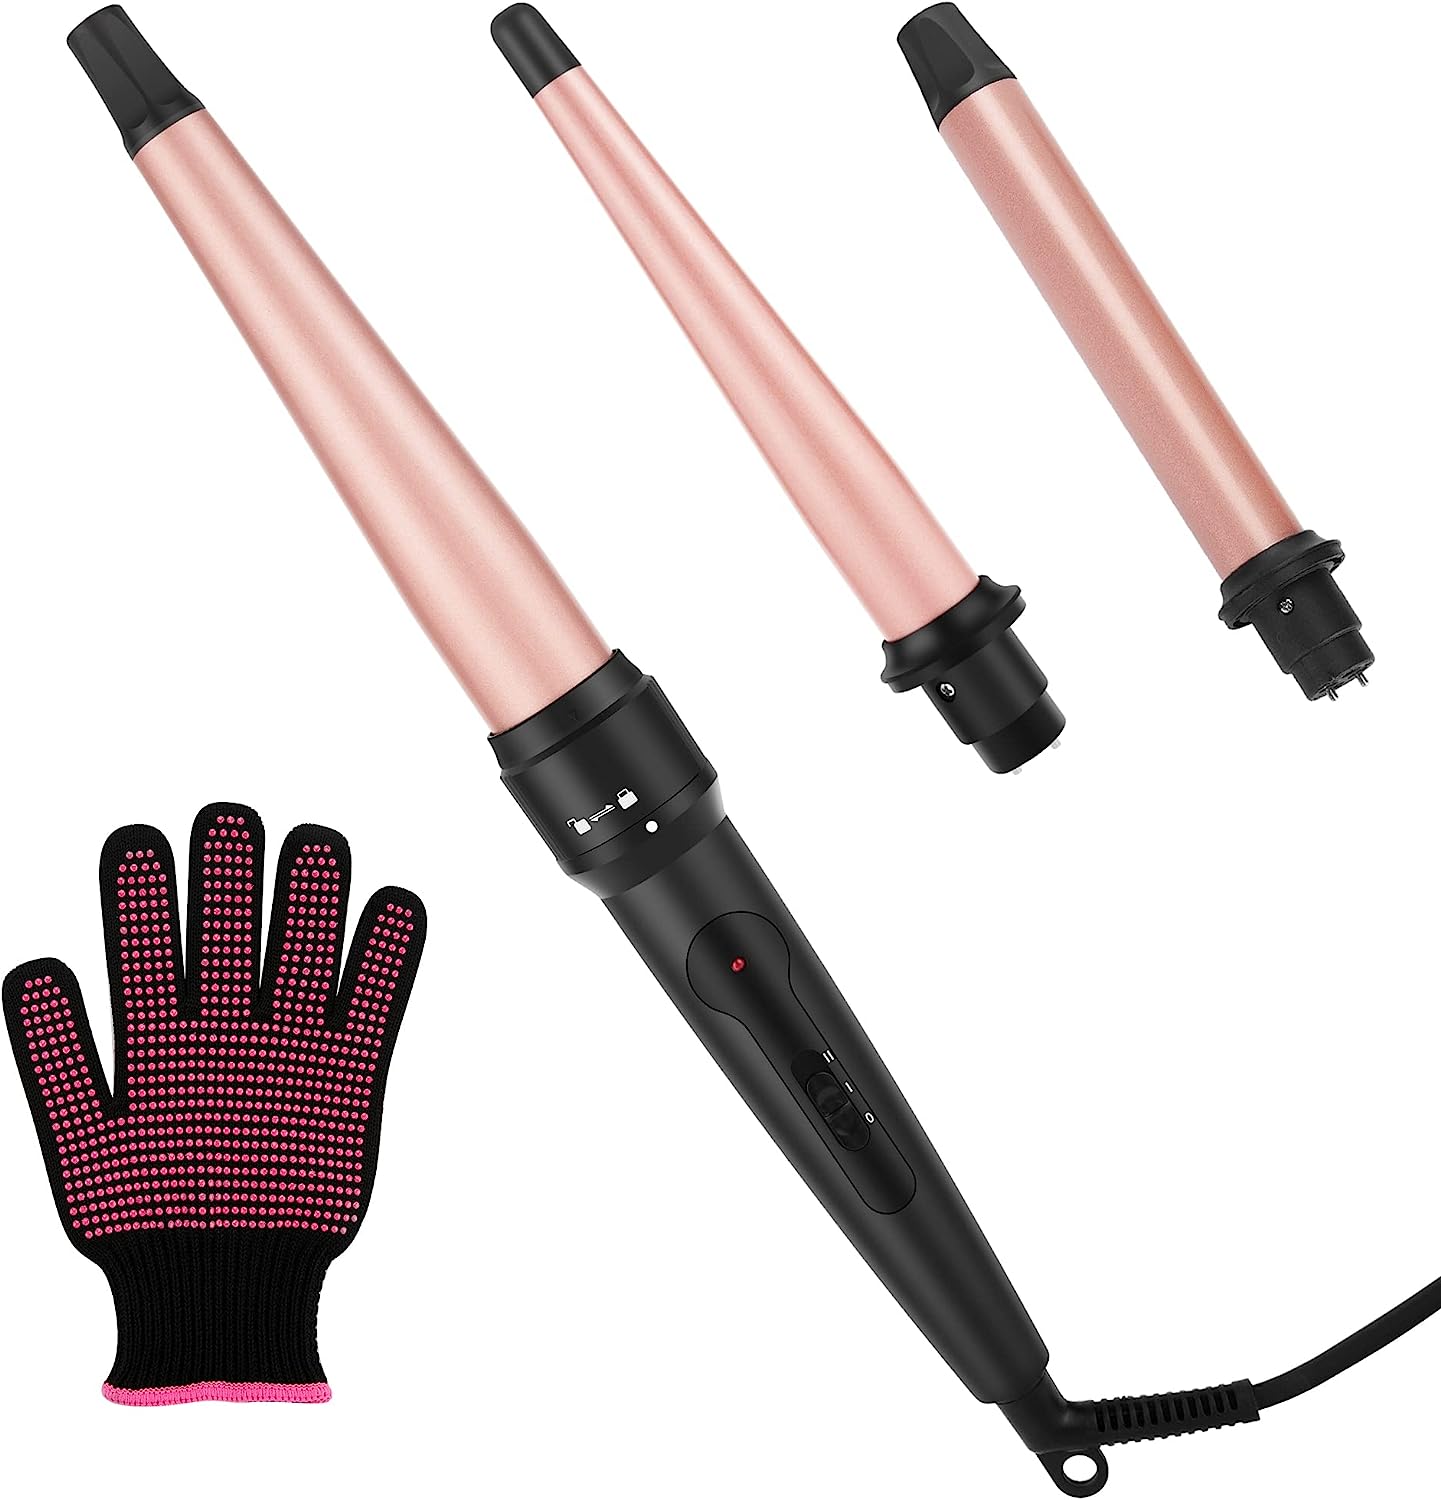 LXMTOU 3 in 1 Curling Wand Tapered Set 1/2-1 1/4 Inch [...]